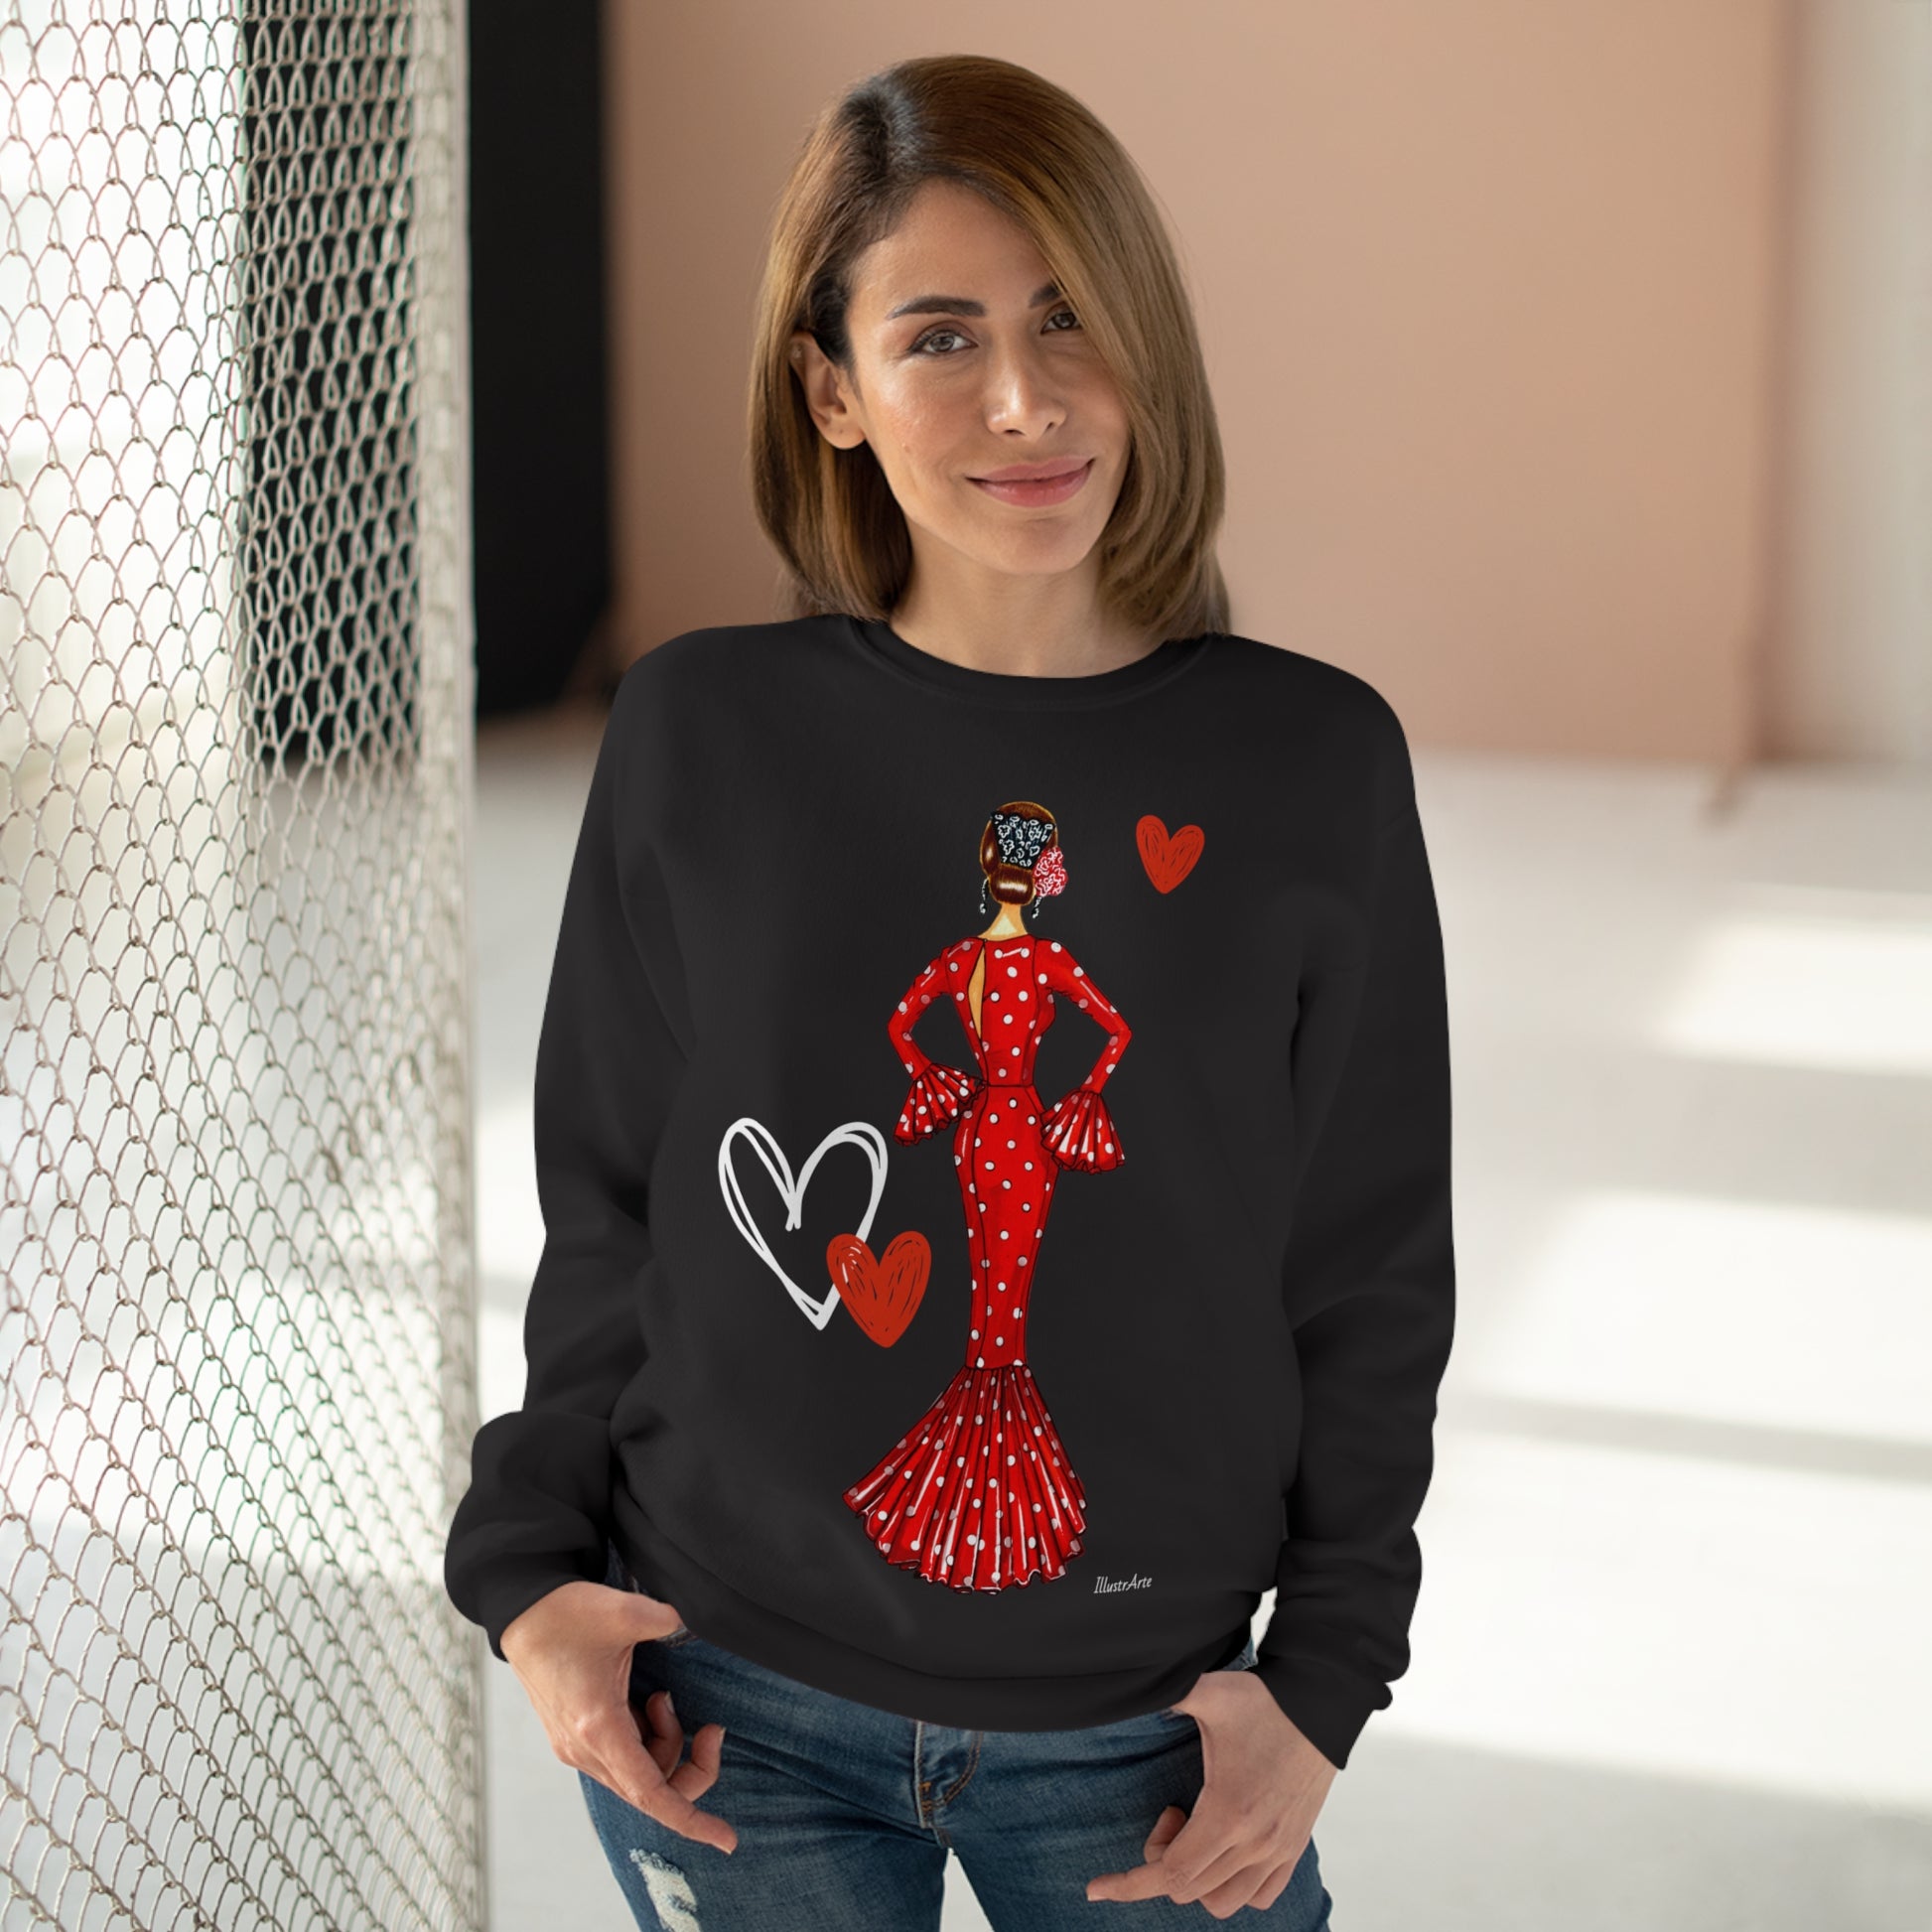 a woman wearing a black sweater with a red dress and hearts on it